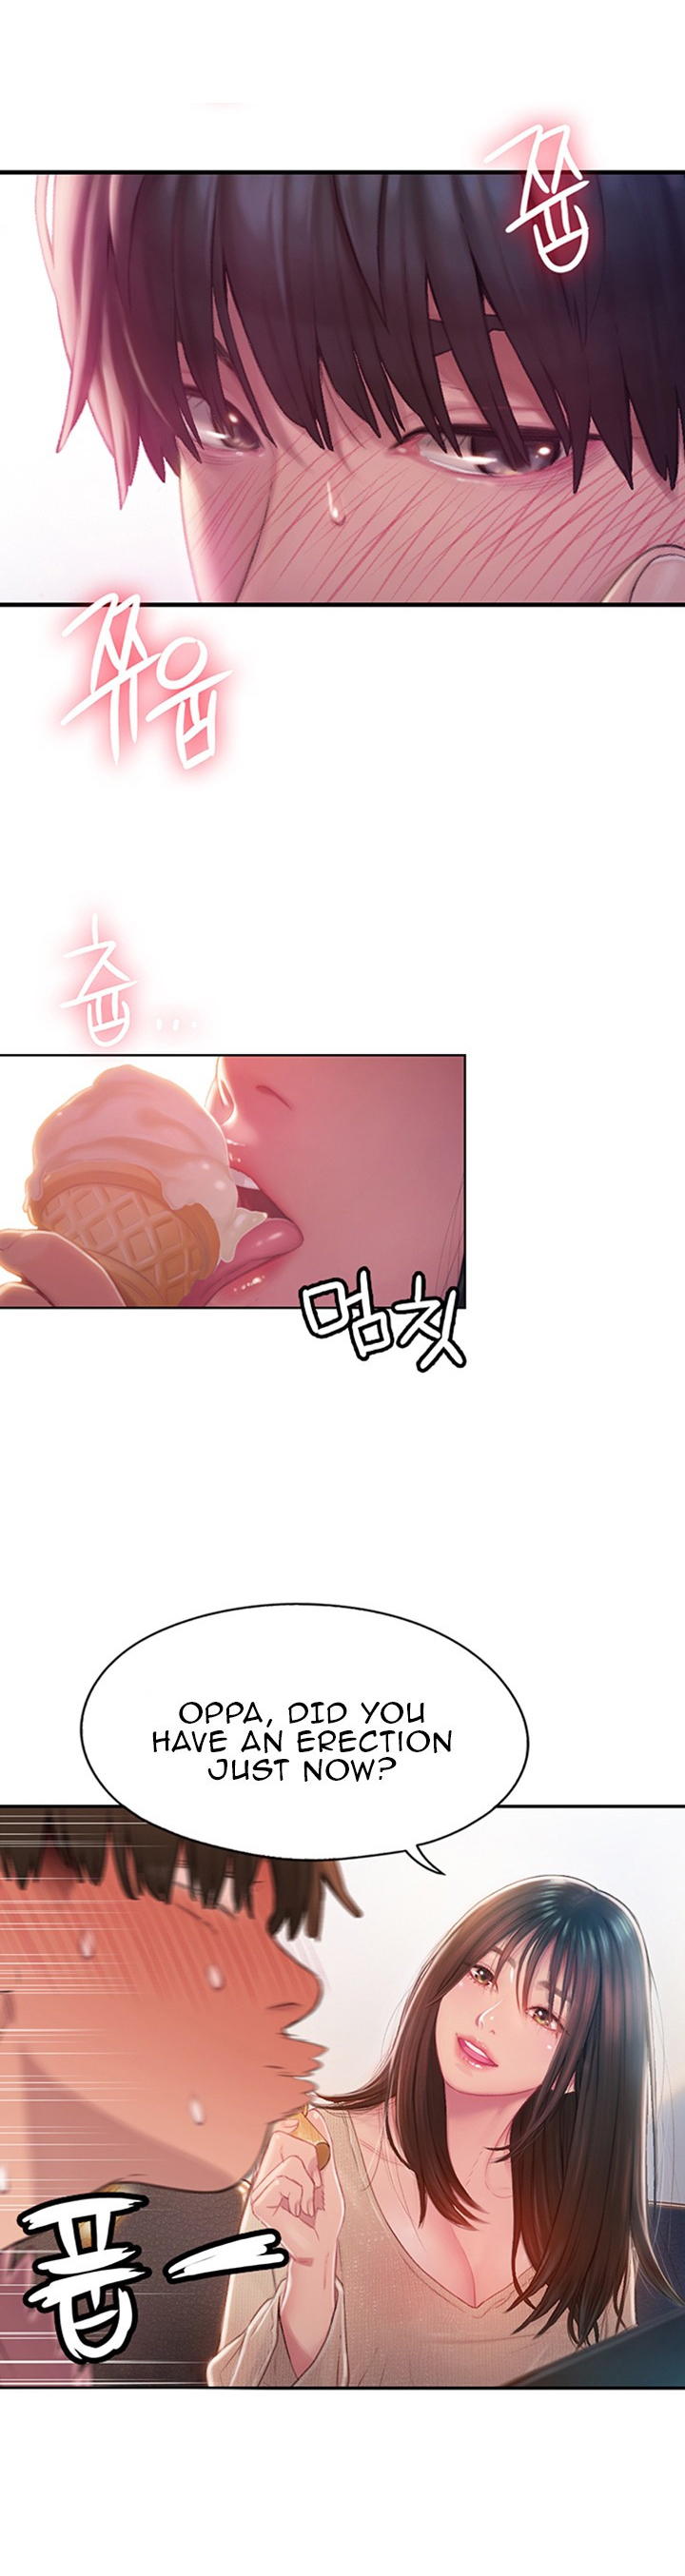 [Park Hyeongjun] Love Limit Exceeded (01-22) Ongoing - Page 4